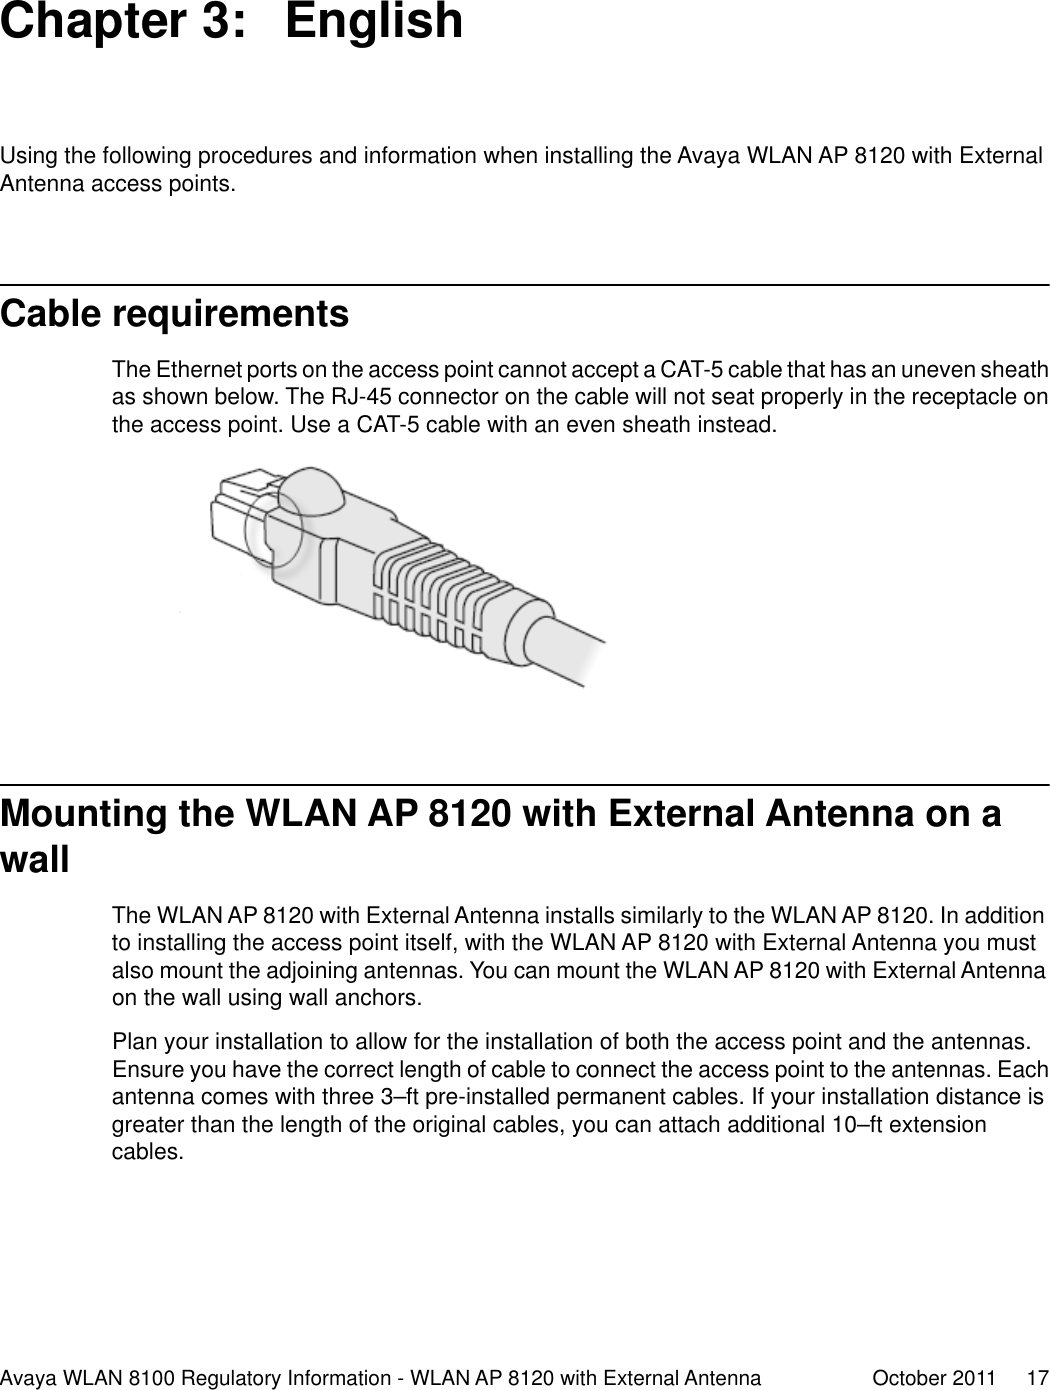 Chapter 3:  EnglishUsing the following procedures and information when installing the Avaya WLAN AP 8120 with ExternalAntenna access points.Cable requirementsThe Ethernet ports on the access point cannot accept a CAT-5 cable that has an uneven sheathas shown below. The RJ-45 connector on the cable will not seat properly in the receptacle onthe access point. Use a CAT-5 cable with an even sheath instead.Mounting the WLAN AP 8120 with External Antenna on awallThe WLAN AP 8120 with External Antenna installs similarly to the WLAN AP 8120. In additionto installing the access point itself, with the WLAN AP 8120 with External Antenna you mustalso mount the adjoining antennas. You can mount the WLAN AP 8120 with External Antennaon the wall using wall anchors.Plan your installation to allow for the installation of both the access point and the antennas.Ensure you have the correct length of cable to connect the access point to the antennas. Eachantenna comes with three 3–ft pre-installed permanent cables. If your installation distance isgreater than the length of the original cables, you can attach additional 10–ft extensioncables.Avaya WLAN 8100 Regulatory Information - WLAN AP 8120 with External Antenna October 2011     17